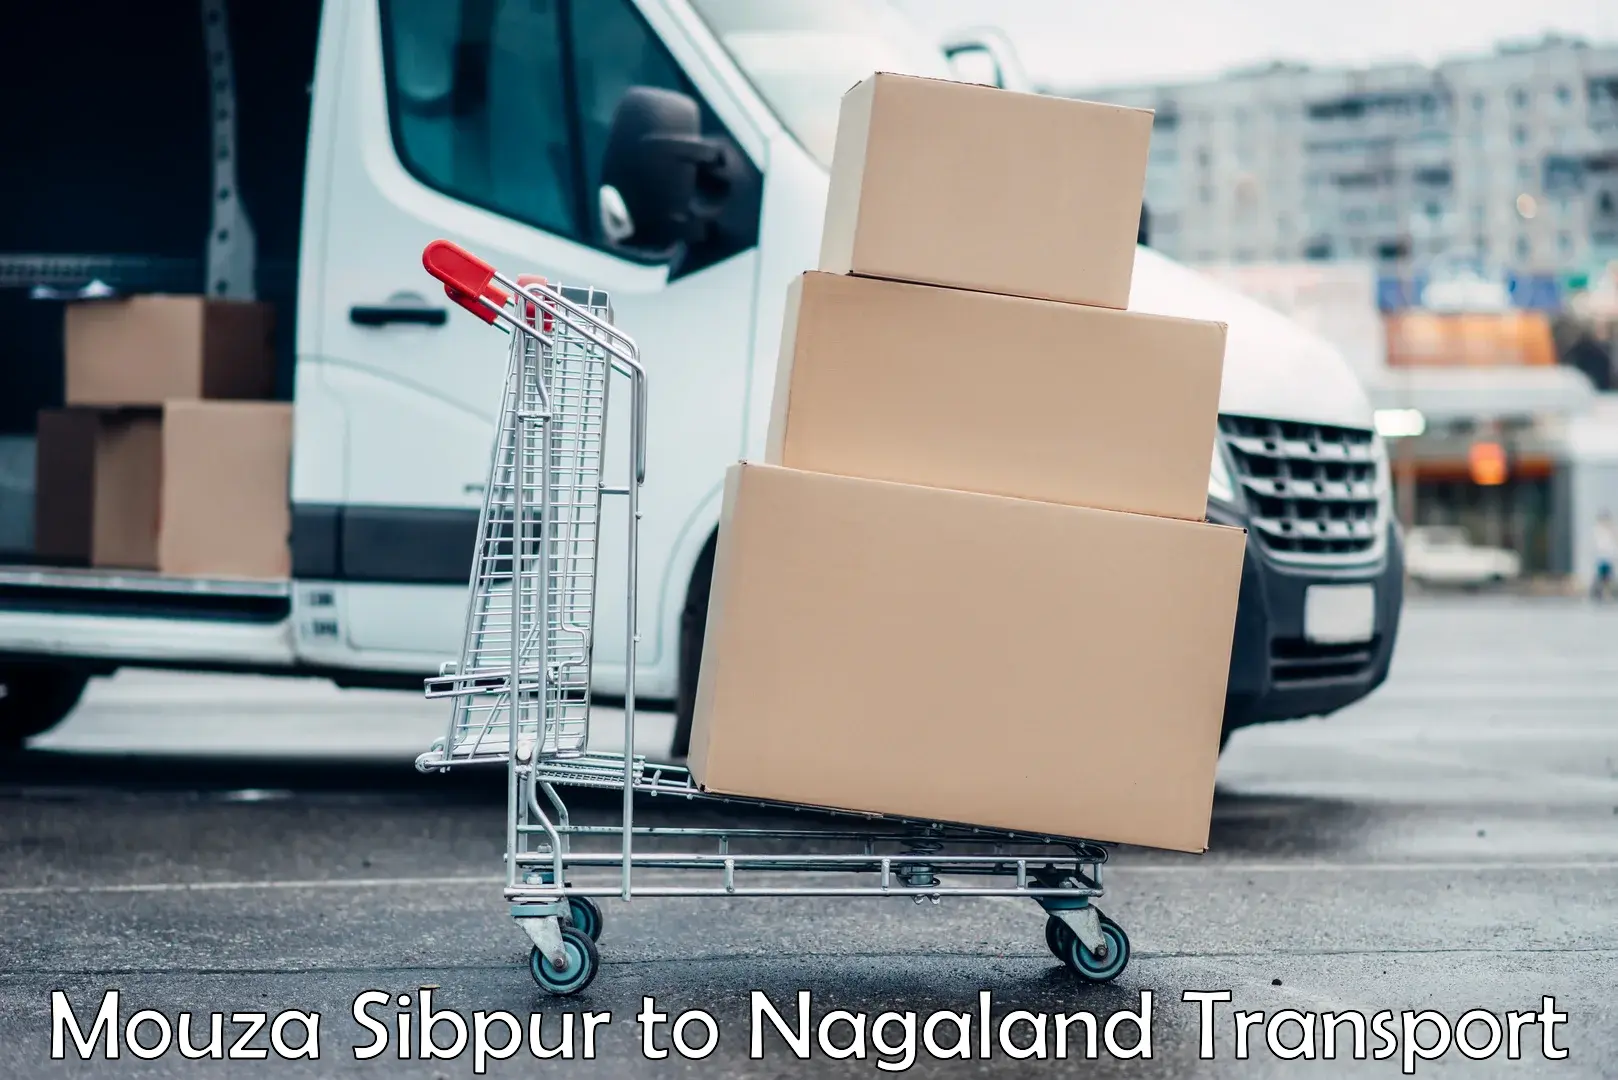 Truck transport companies in India Mouza Sibpur to NIT Nagaland